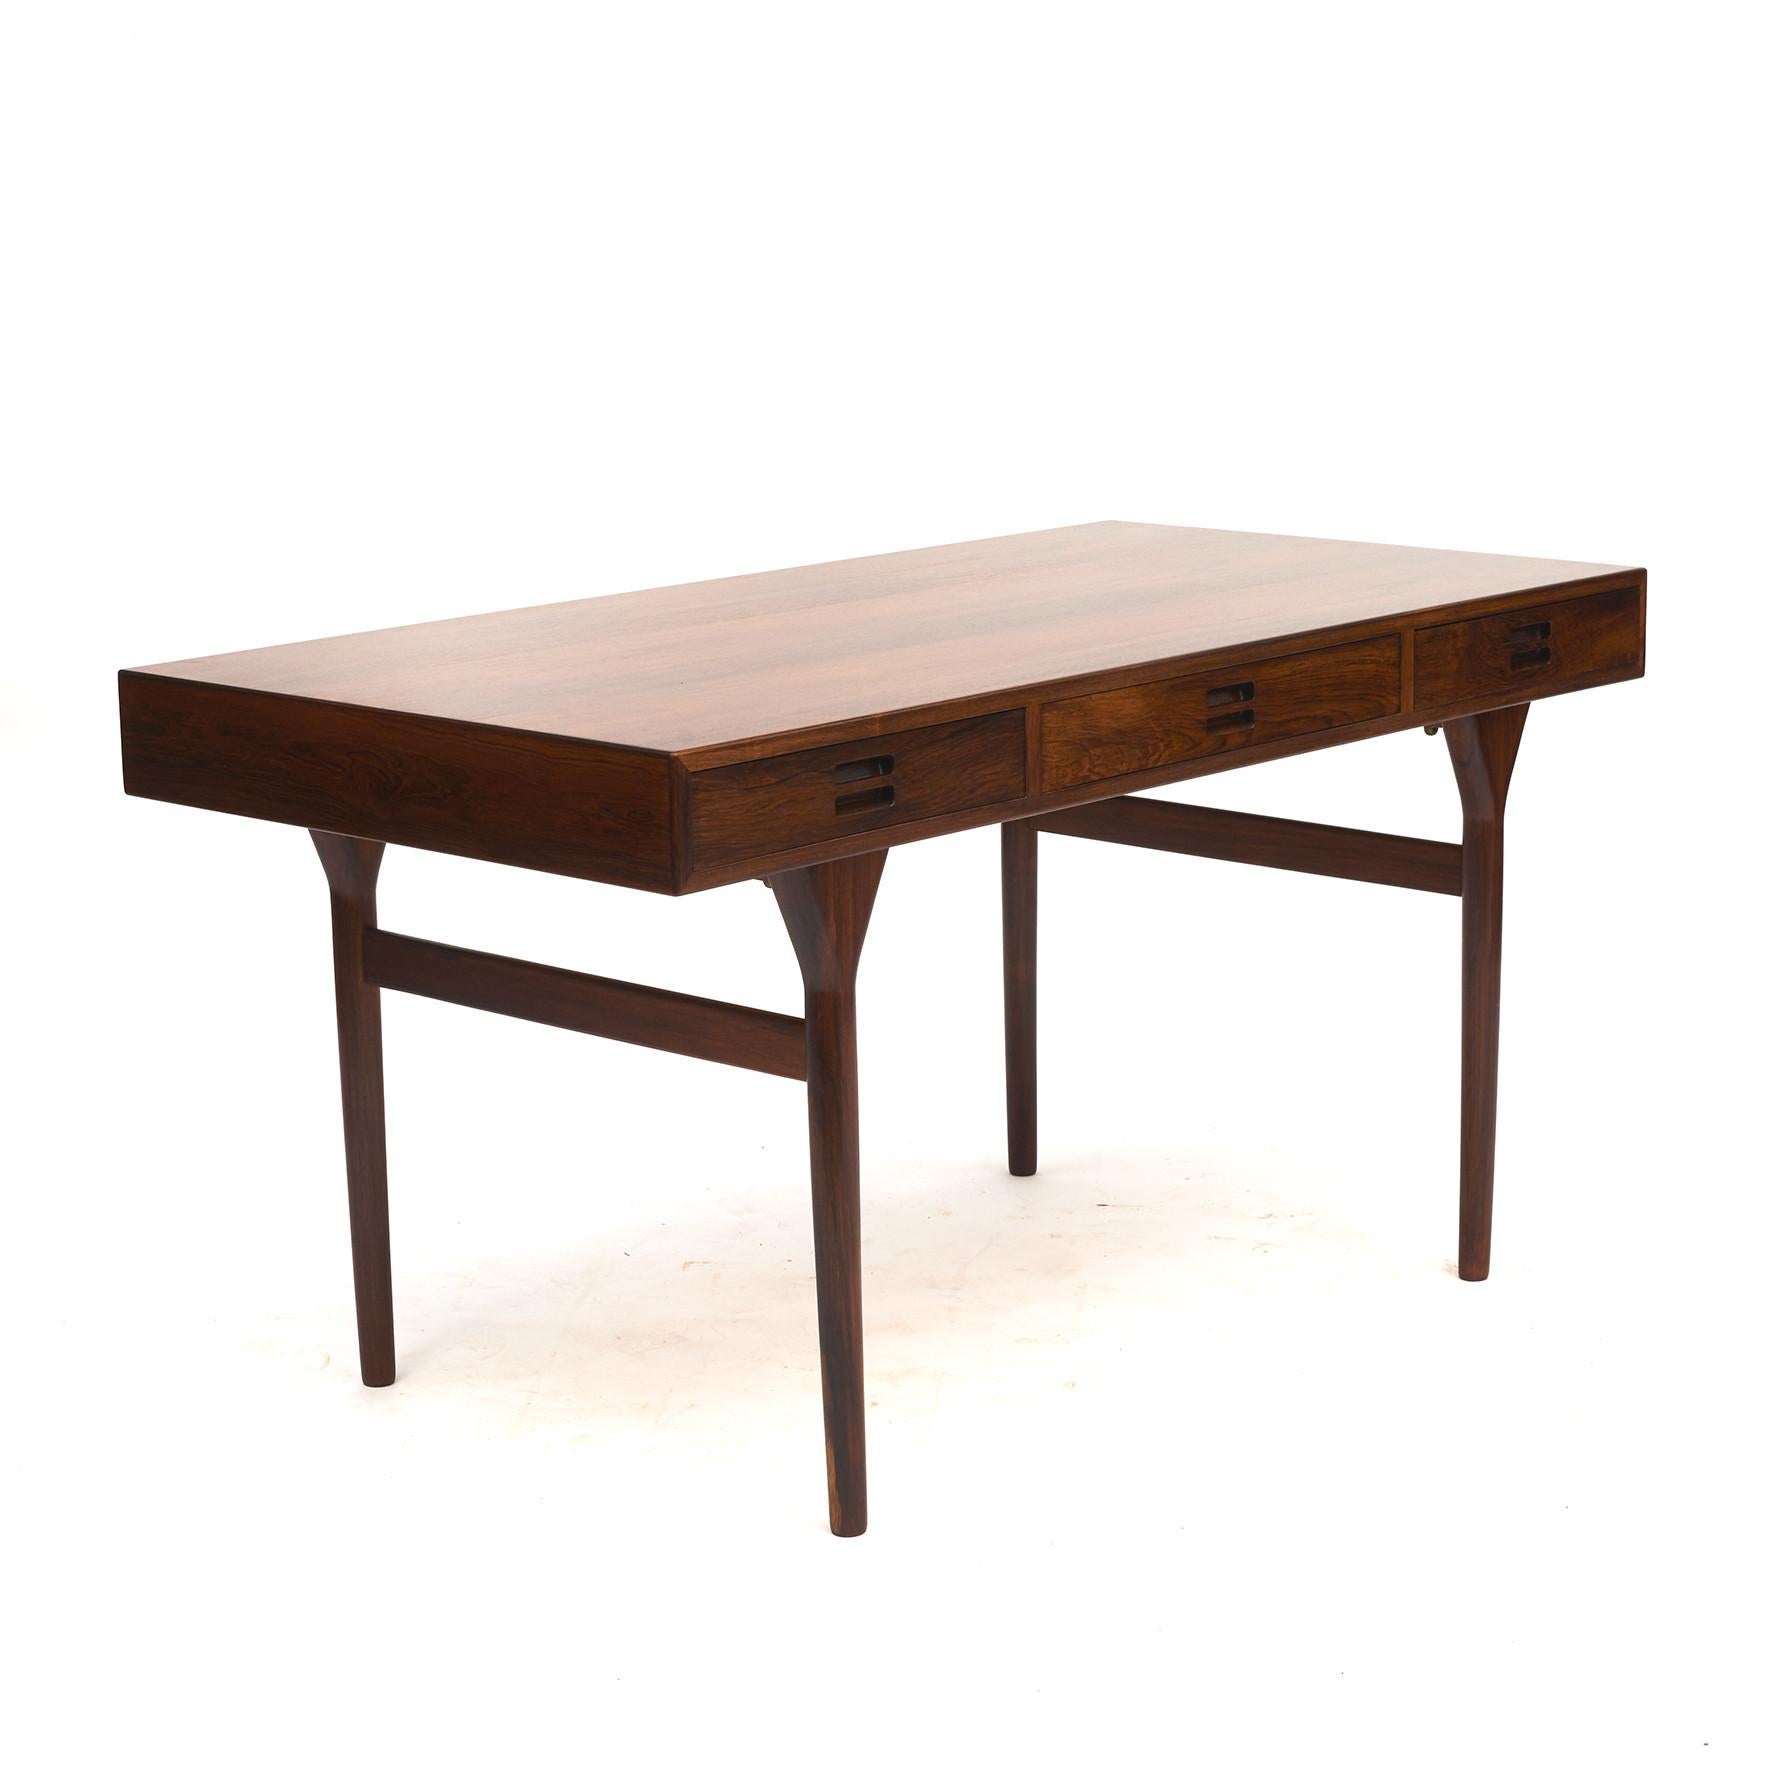 Nanna Ditzel. Freestanding rosewood veneered desk.
Desk, apron and legs with a magnificent grain. Front with three drawers with integrated grips. Tapered legs.

Designed in 1958. Produced by Søren Willadsen, Vejen.
This desk is in superb